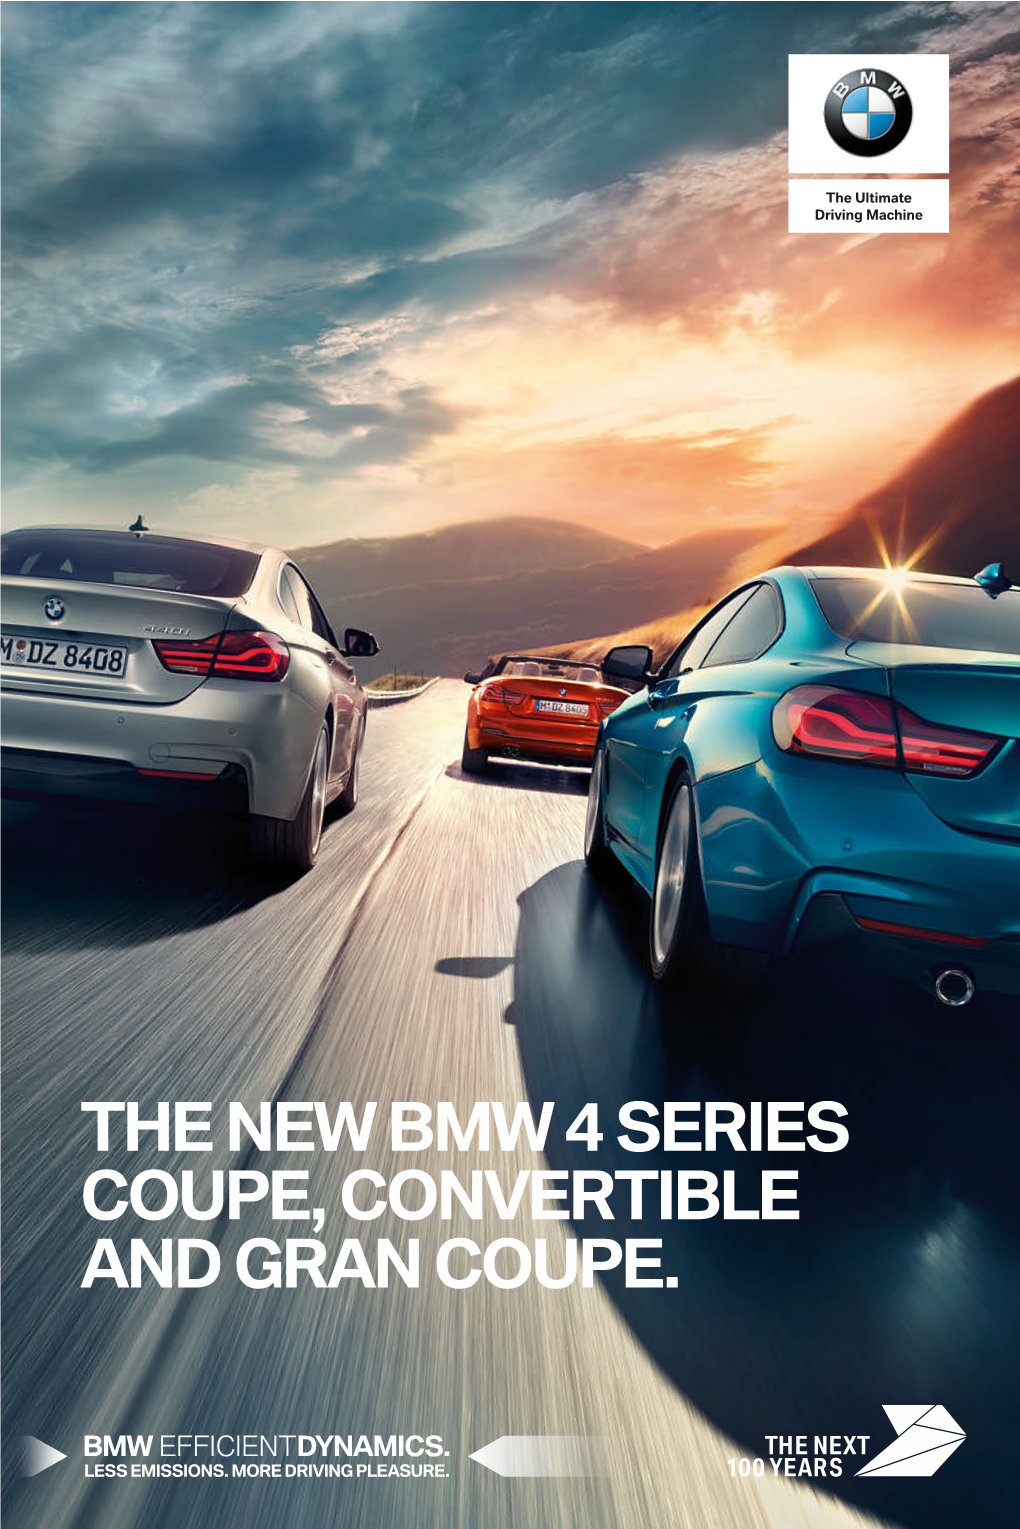 The New Bmw 4 Series Coupe, Convertible and Gran Coupe